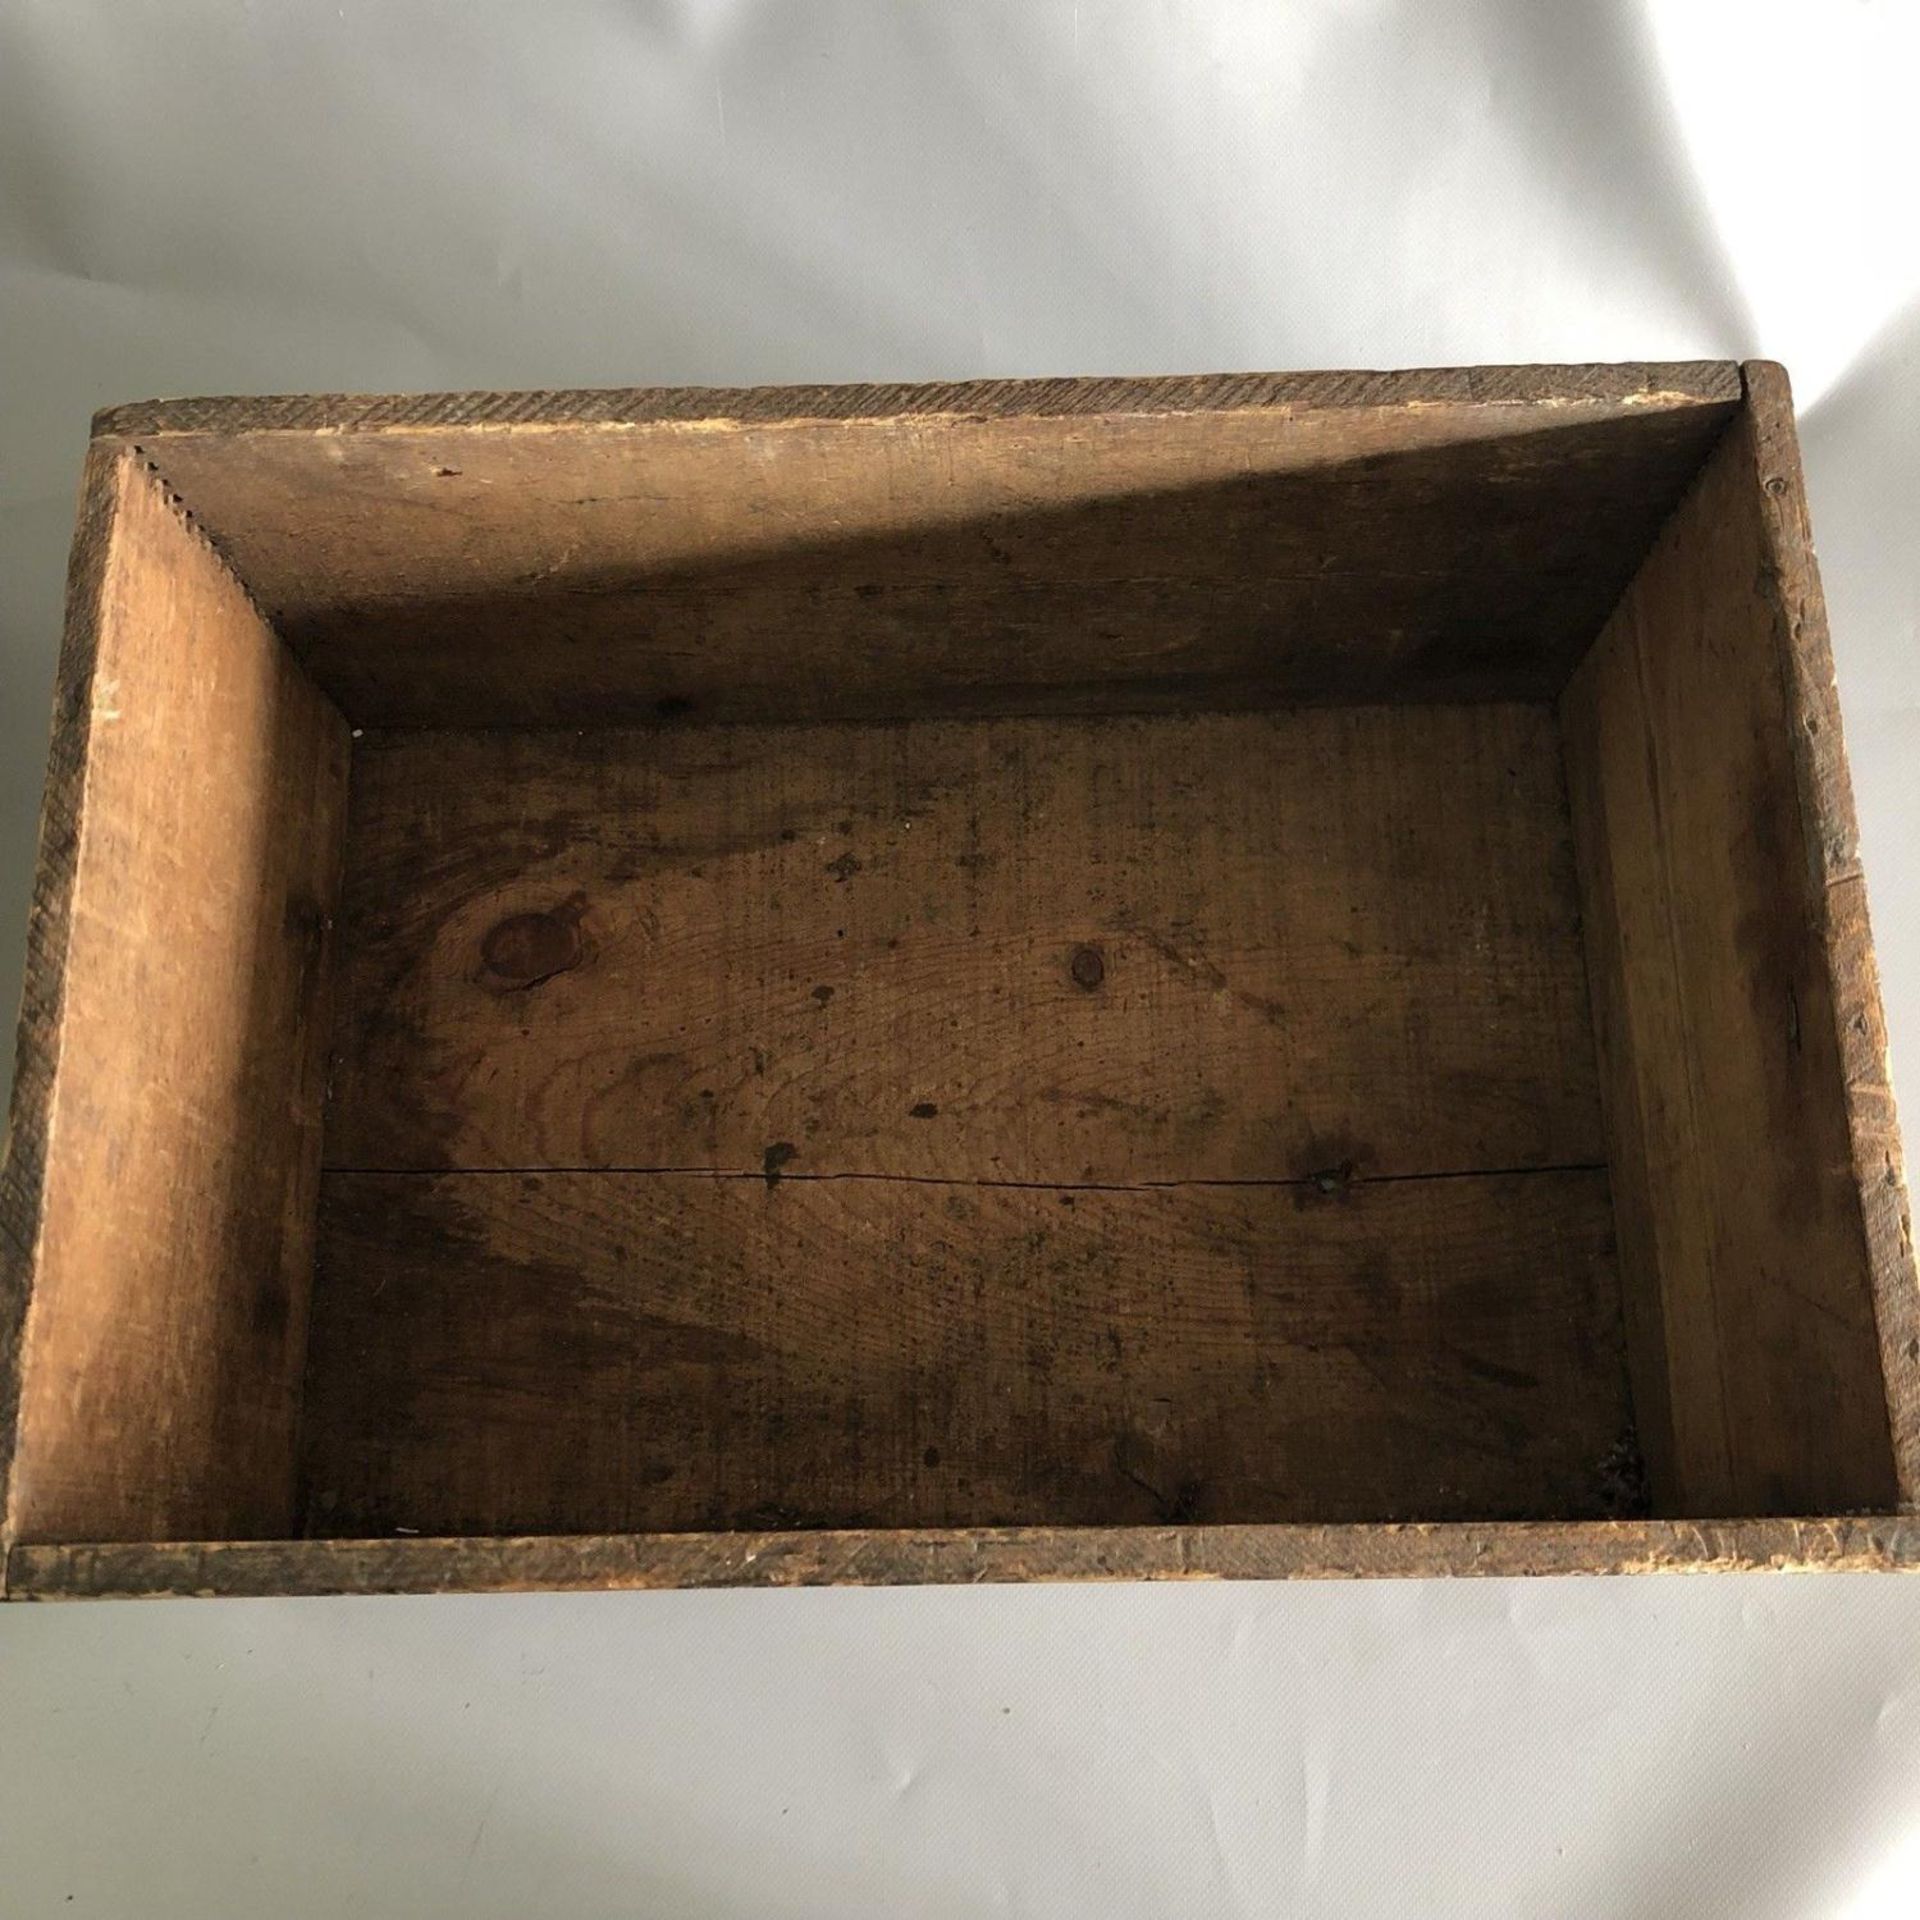 Vintage Military Holston Ordnance High Explosive Wooden Ammunition Box Crate - Image 3 of 4